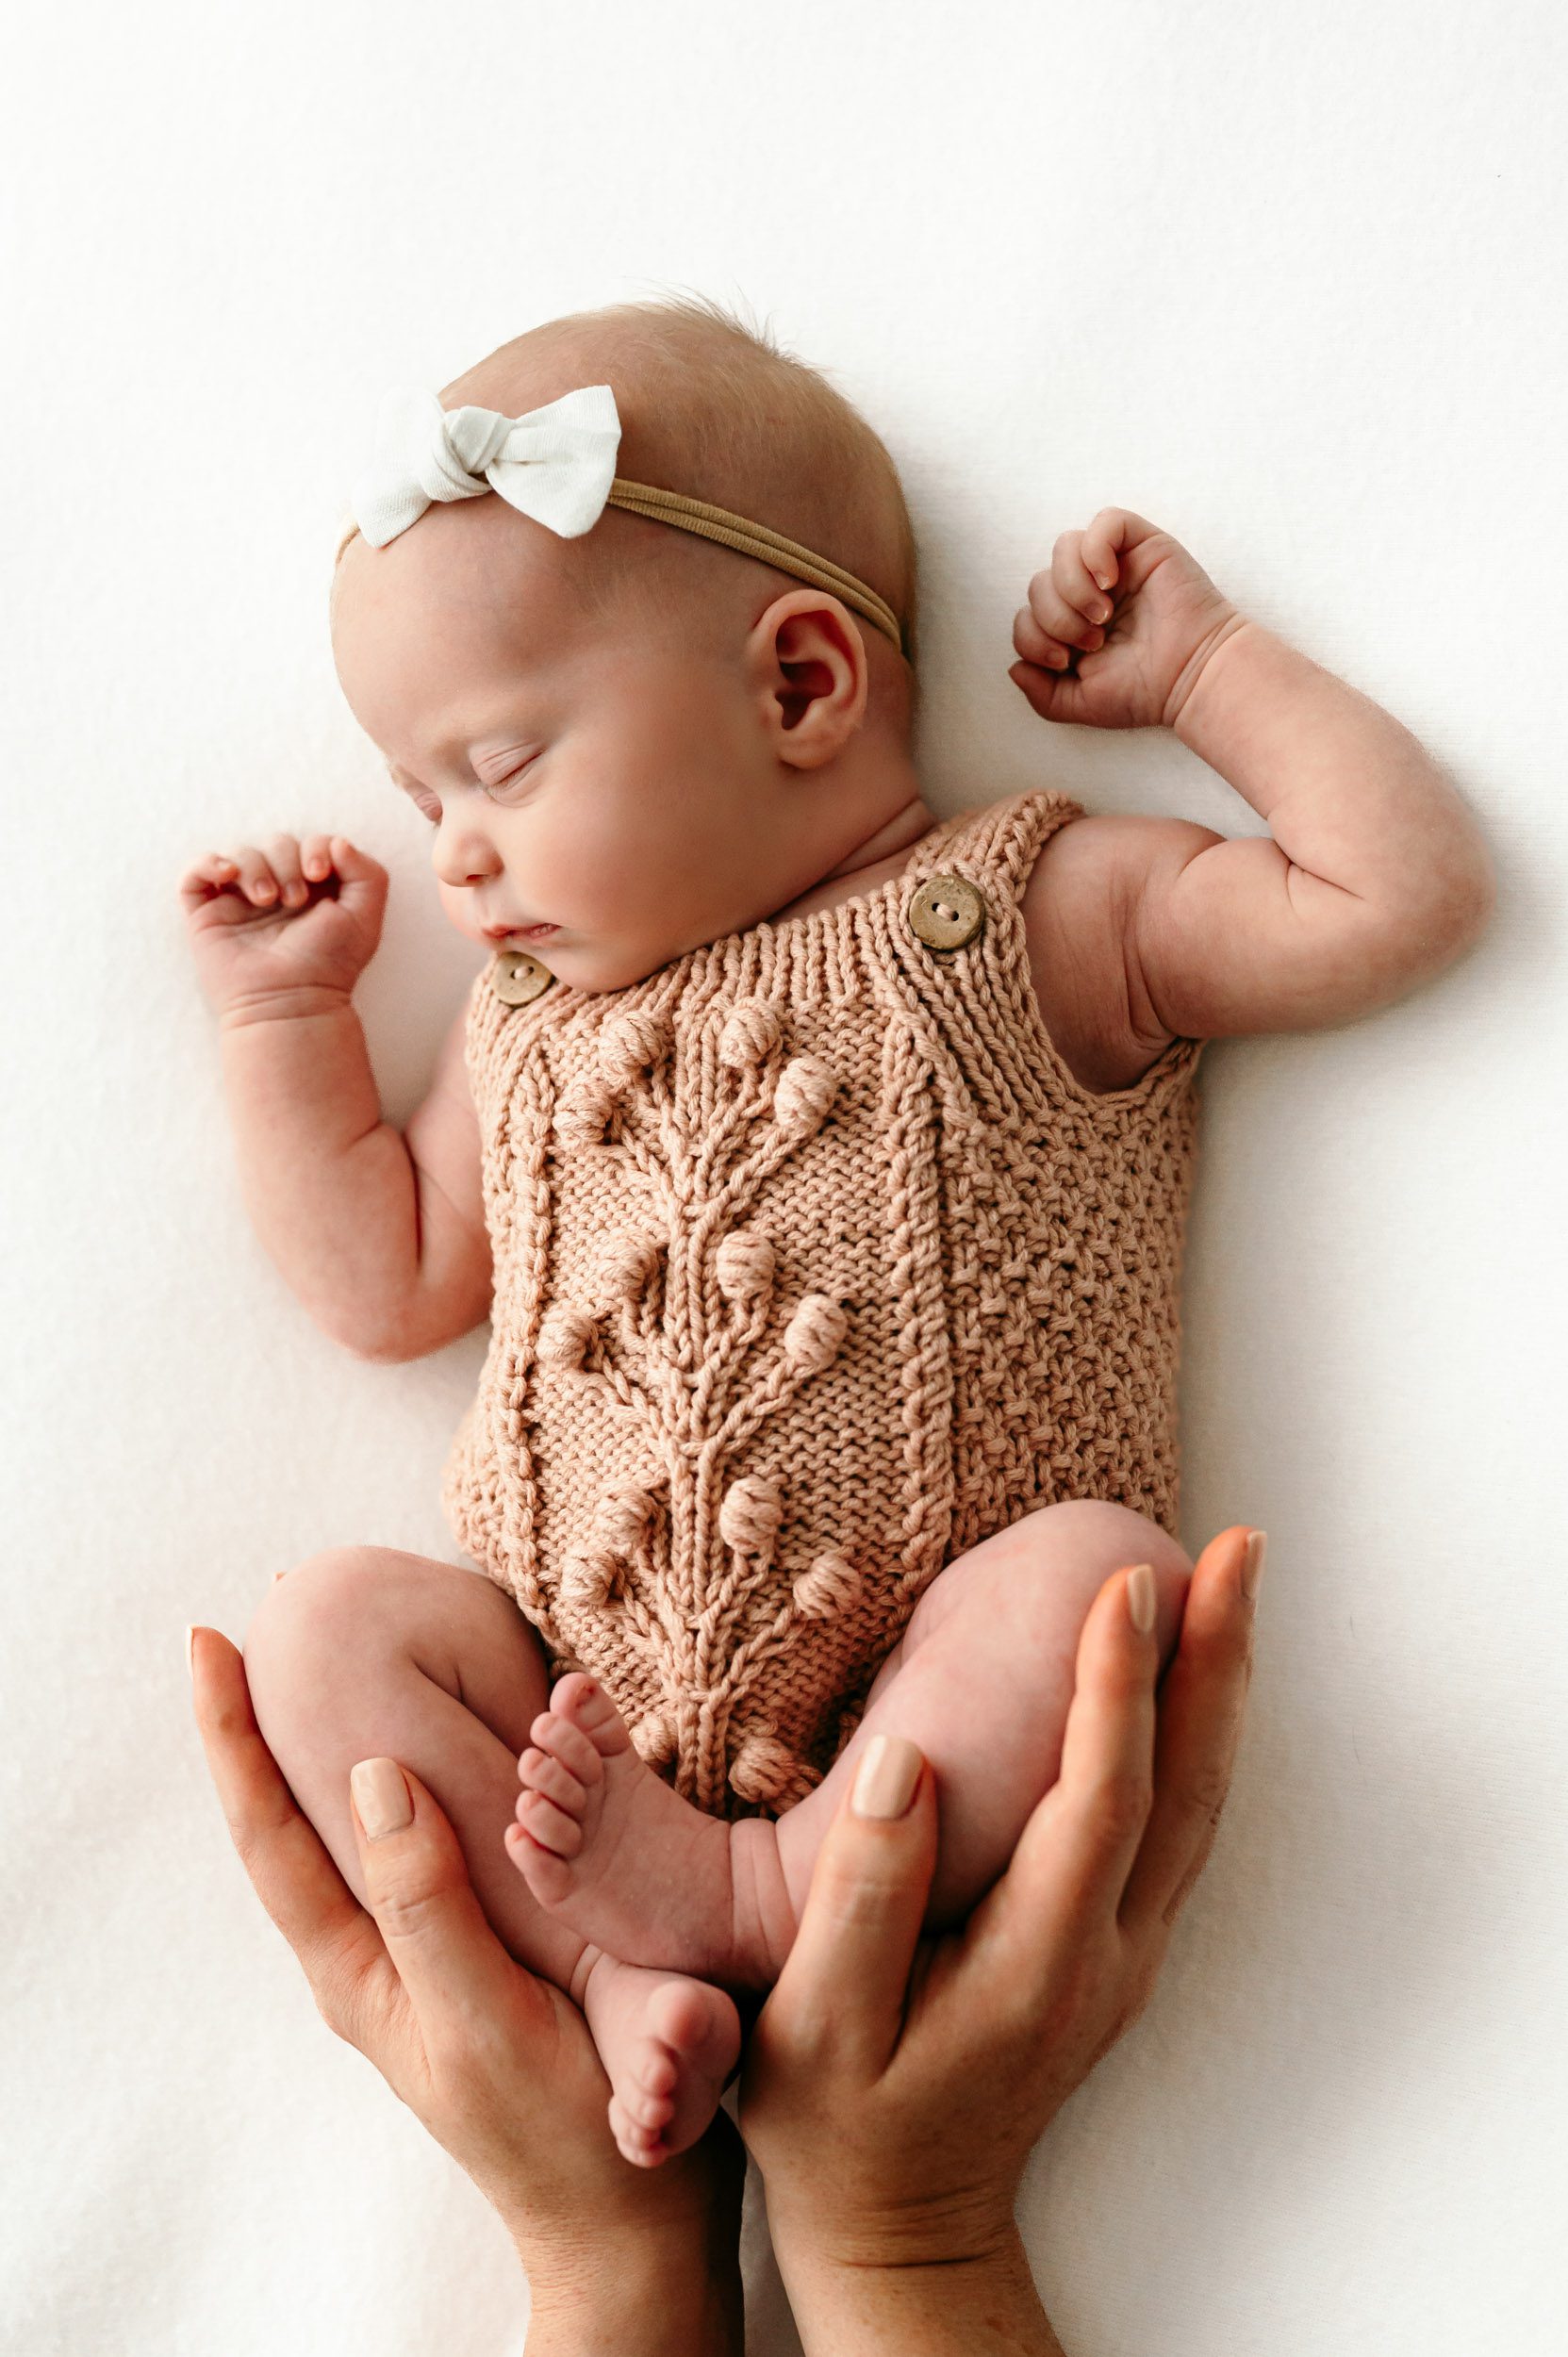 a baby girl wearing a pink knit onesie and a white headband sleeping on a white backdrop while mom cradles her legs in her hands during a newborn photos session